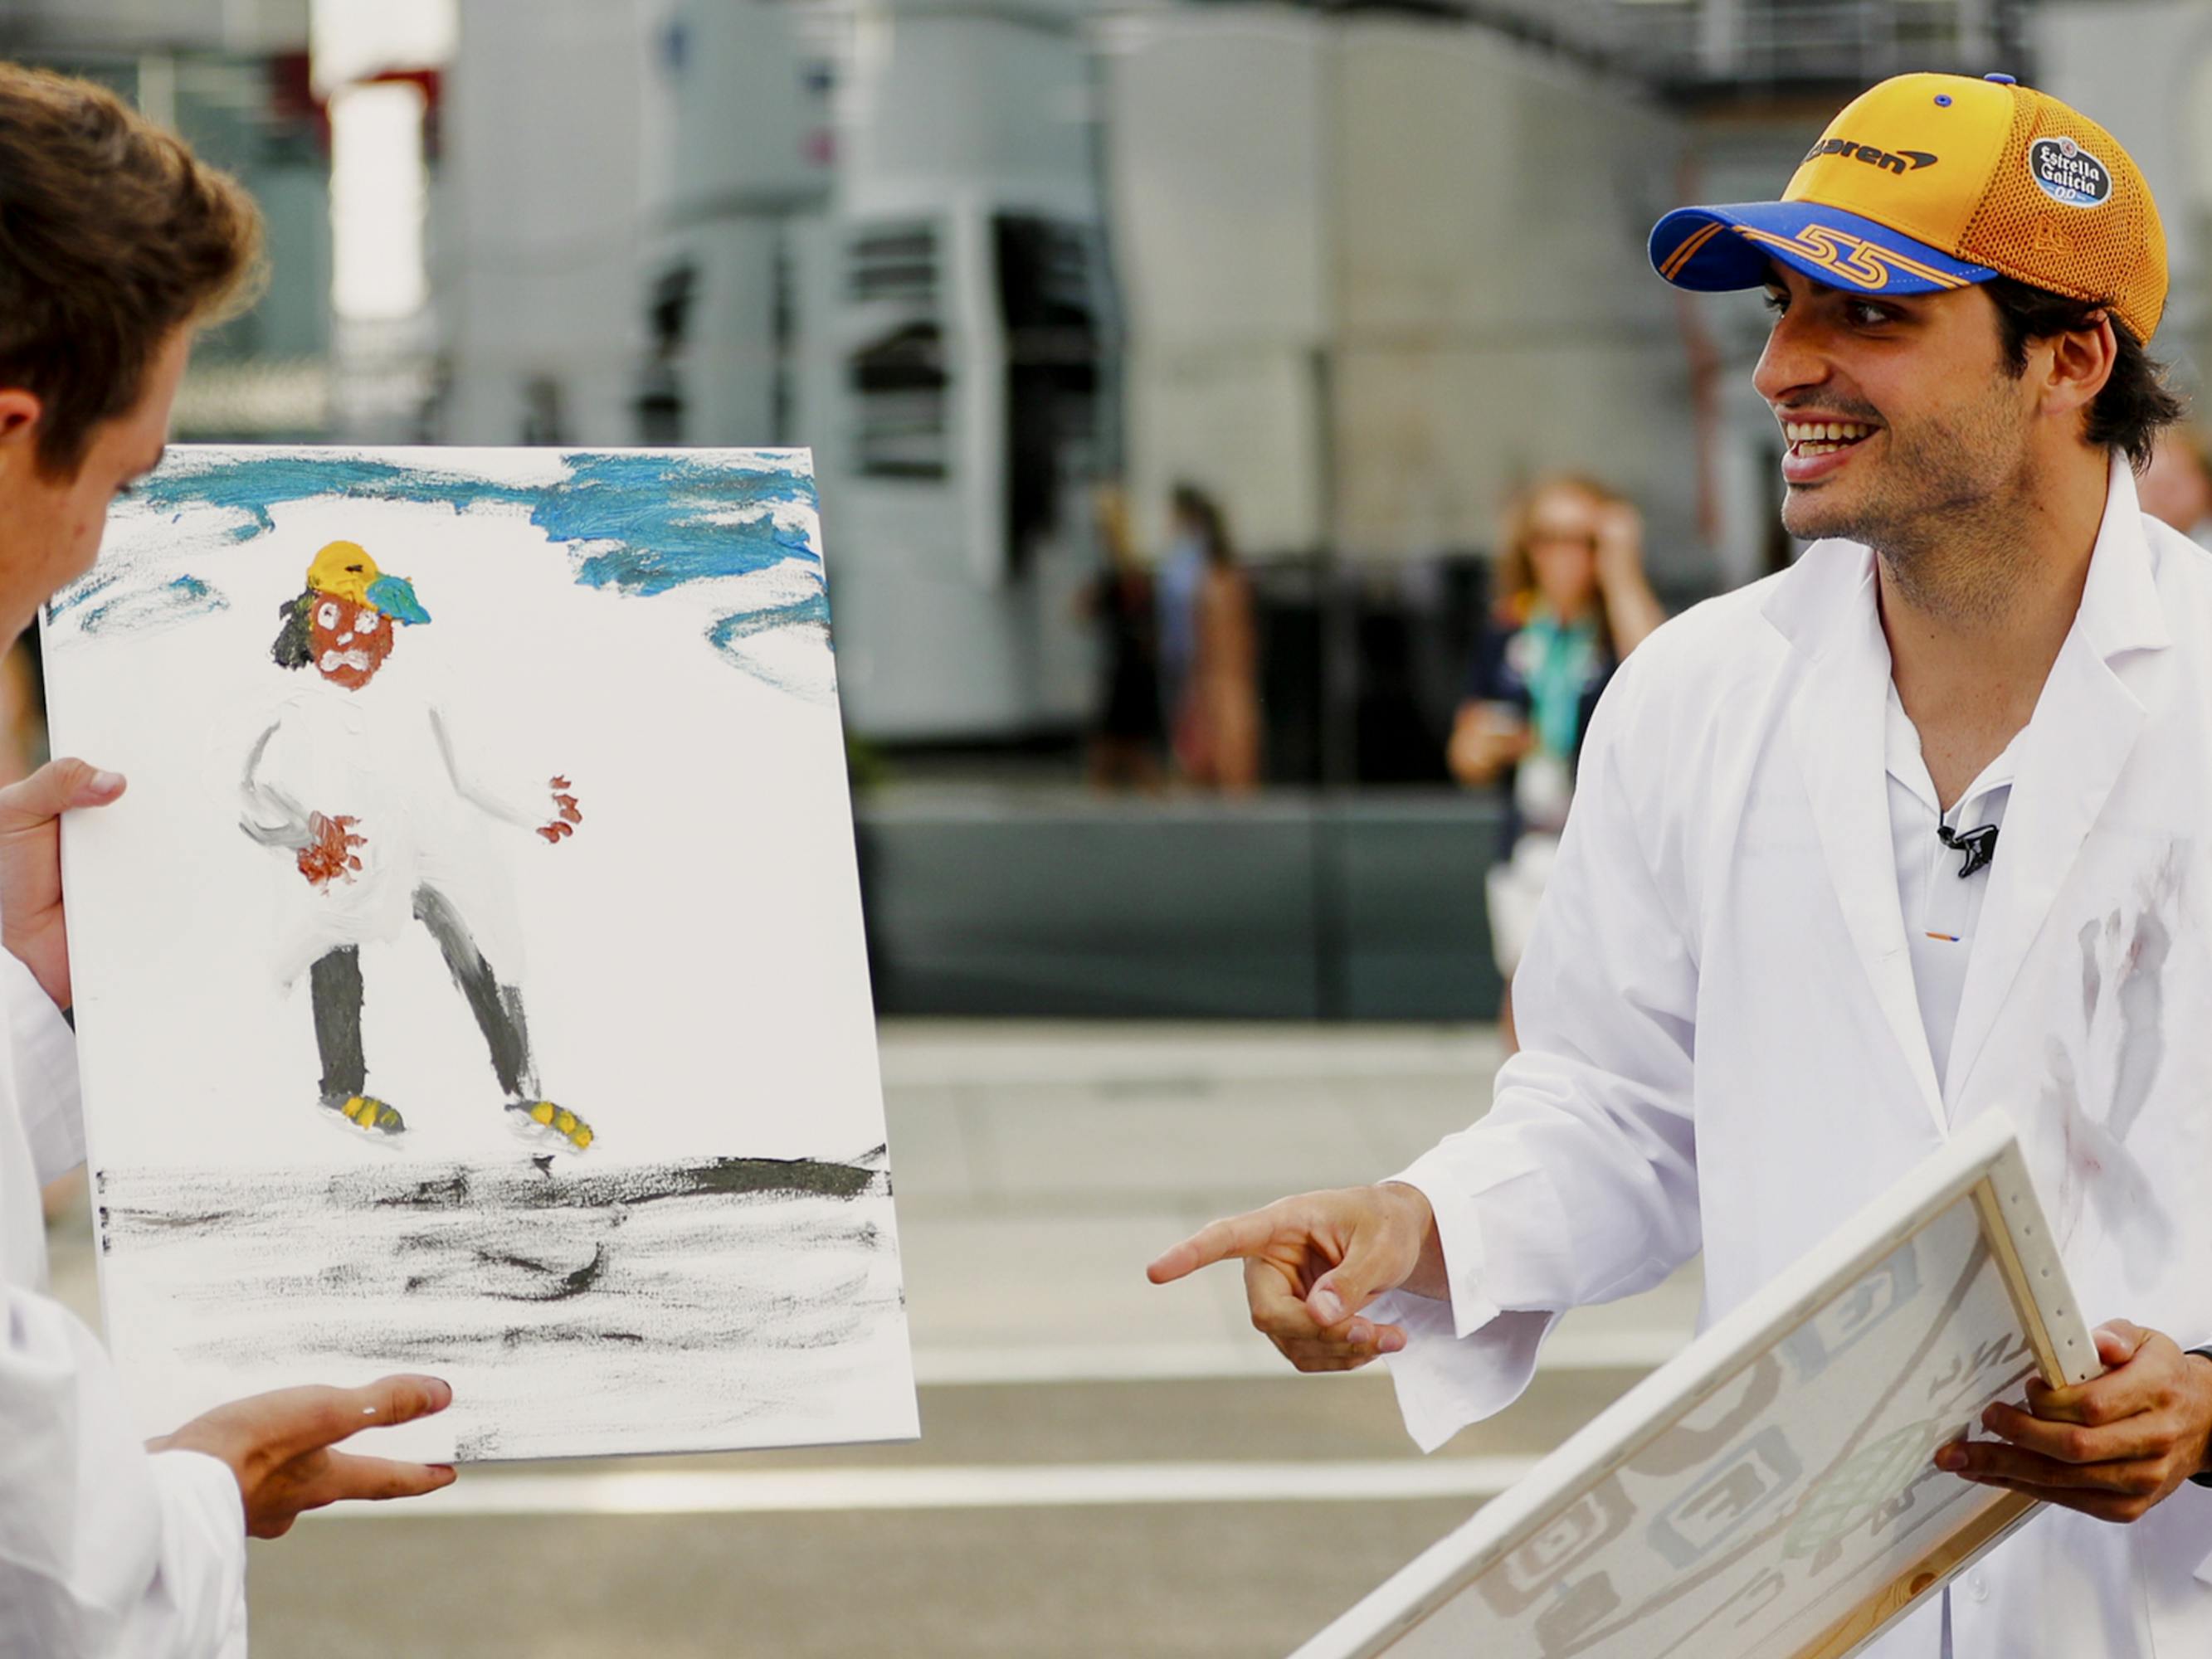 Lando Norris stands on the left holding a painting he has made of friend and teammate Carlos Sainz Jr. Sainz Jr. stands on the right, pointing to the painting and smiling large. 